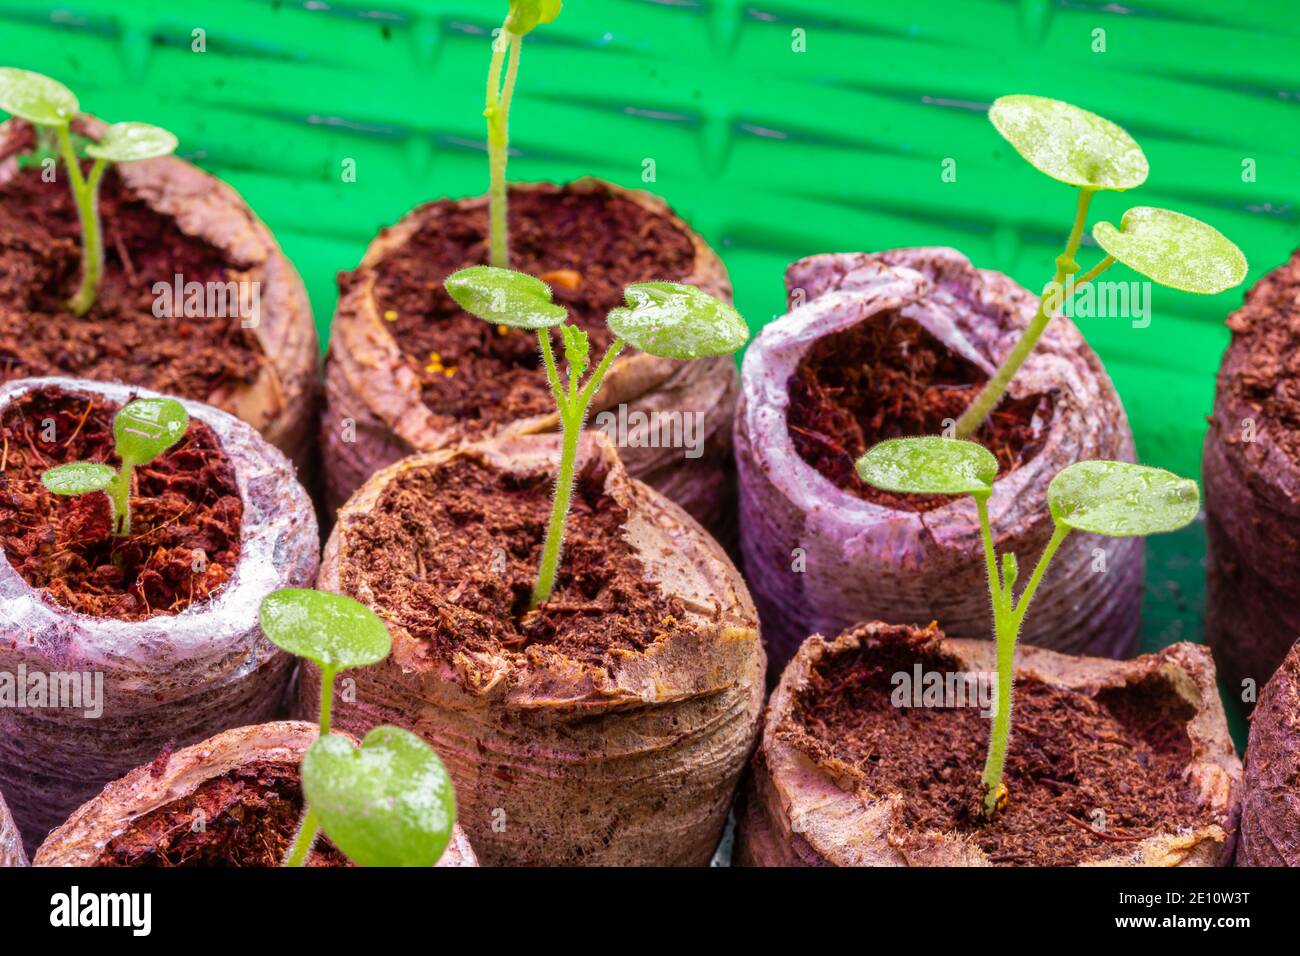 Seedlings in peat tablets. Home plant growing. Preparing for the planting season Stock Photo